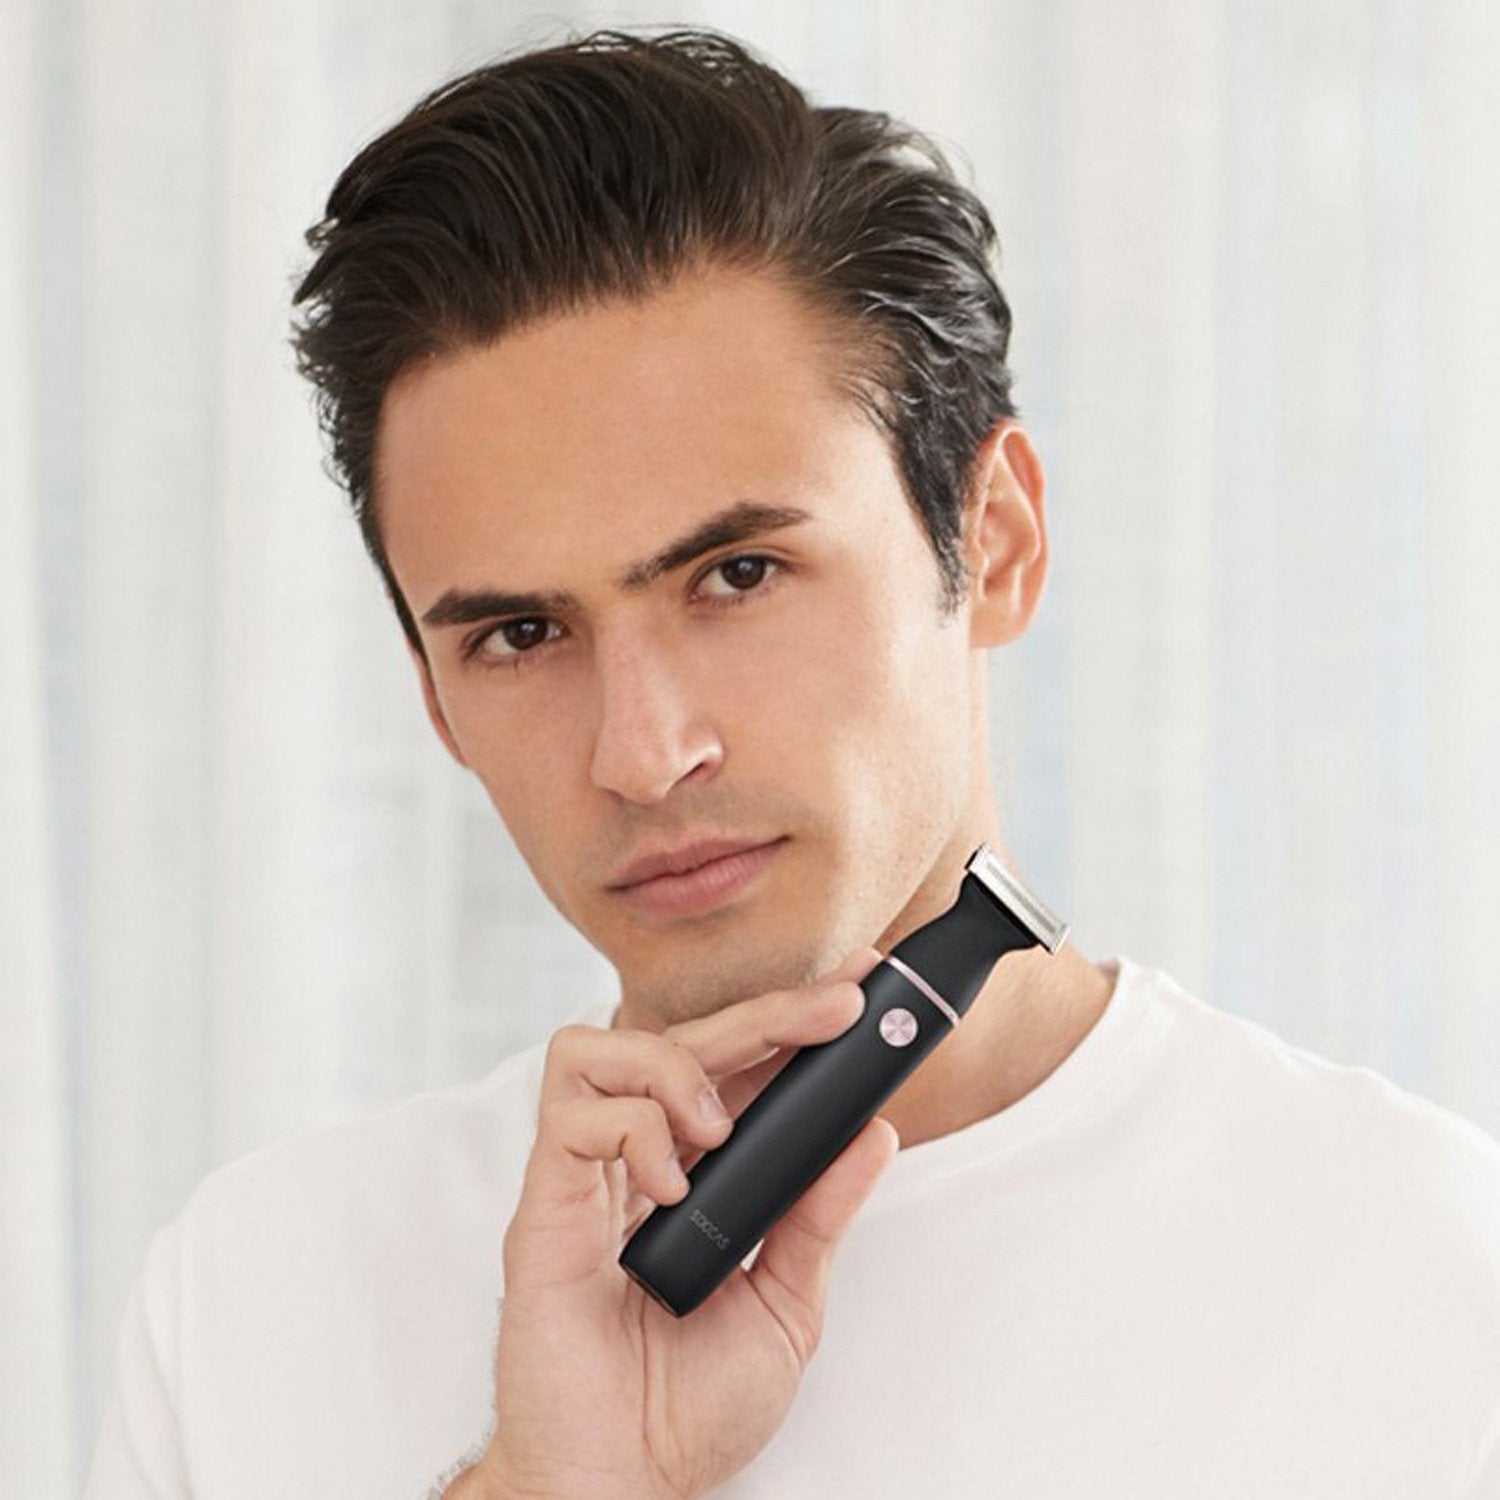 Shop and buy Soocas ET2 Rechargeable Professional Waterproof Hair Shaver| Casefactorie® online with great deals and sales prices with fast and safe shipping. Casefactorie is the largest Singapore official authorised retailer for the largest collection of mobile premium accessories, personal and home care items.